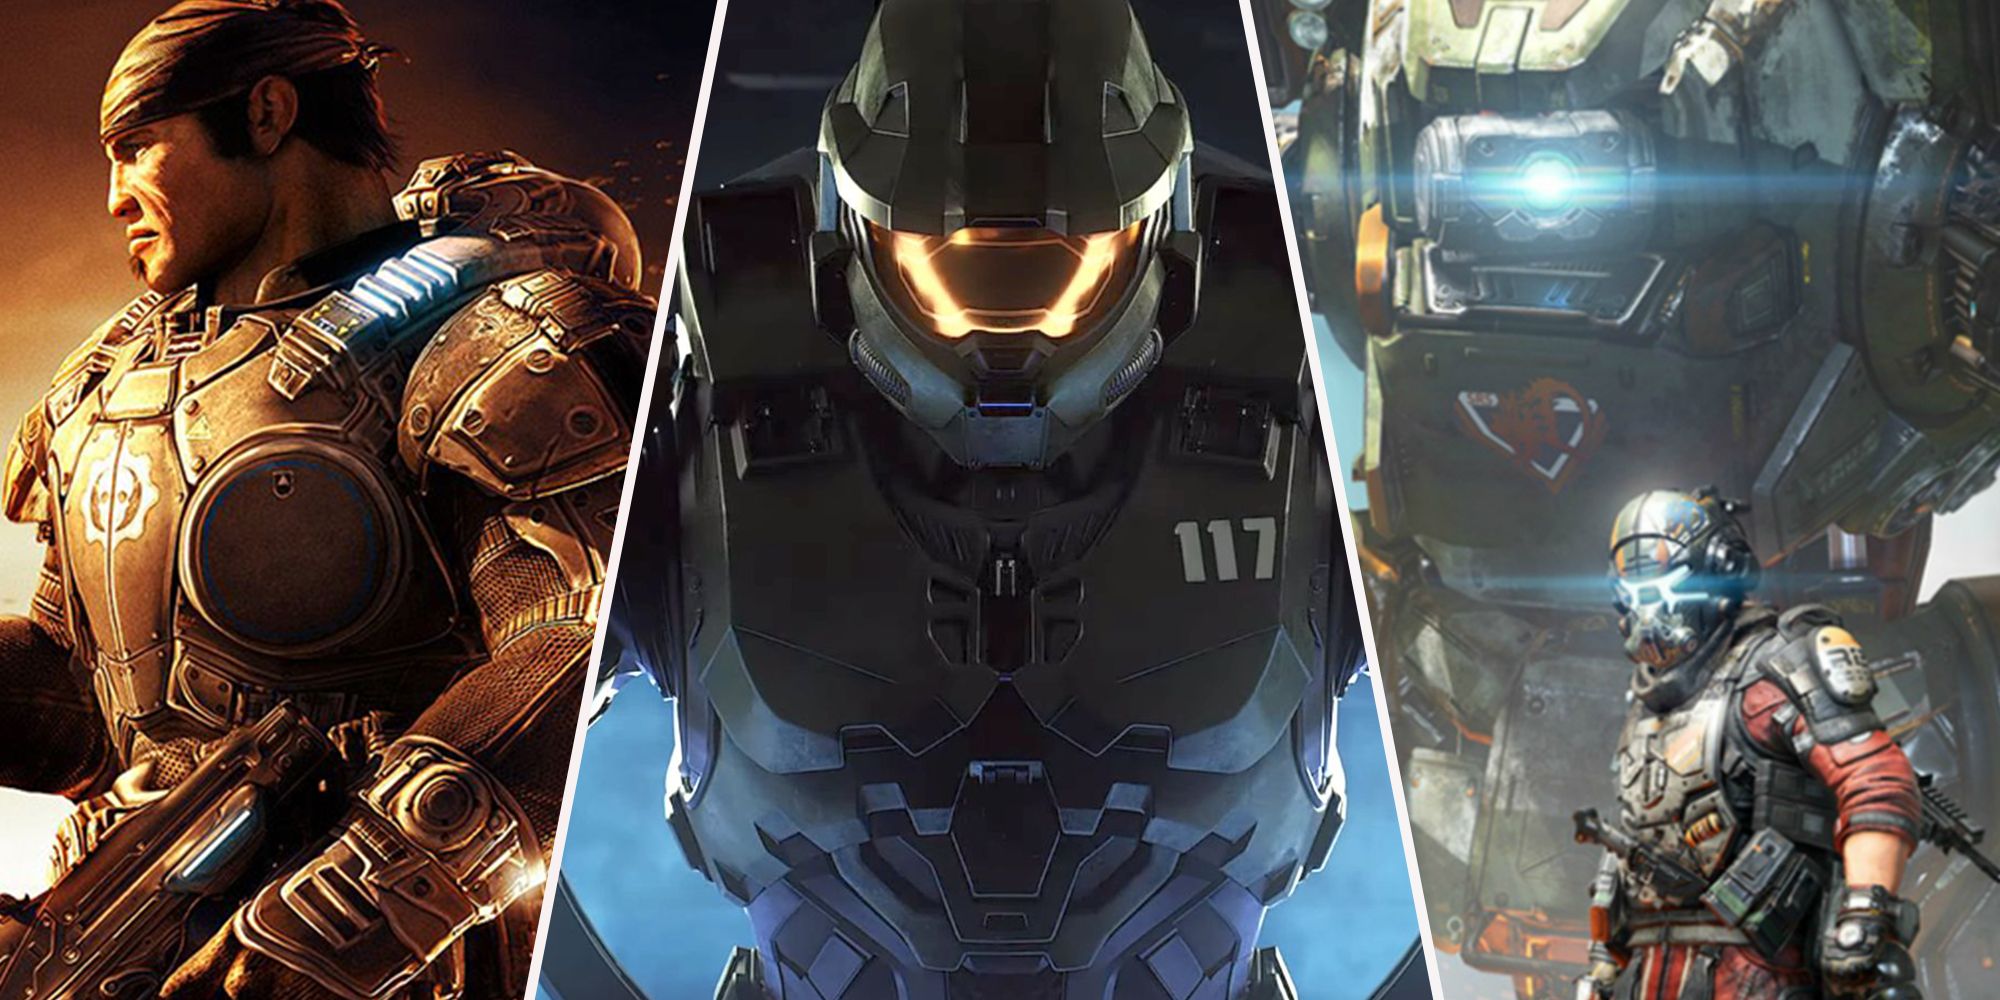 Game Adaptations Like 'Halo' to Watch Next - Metacritic